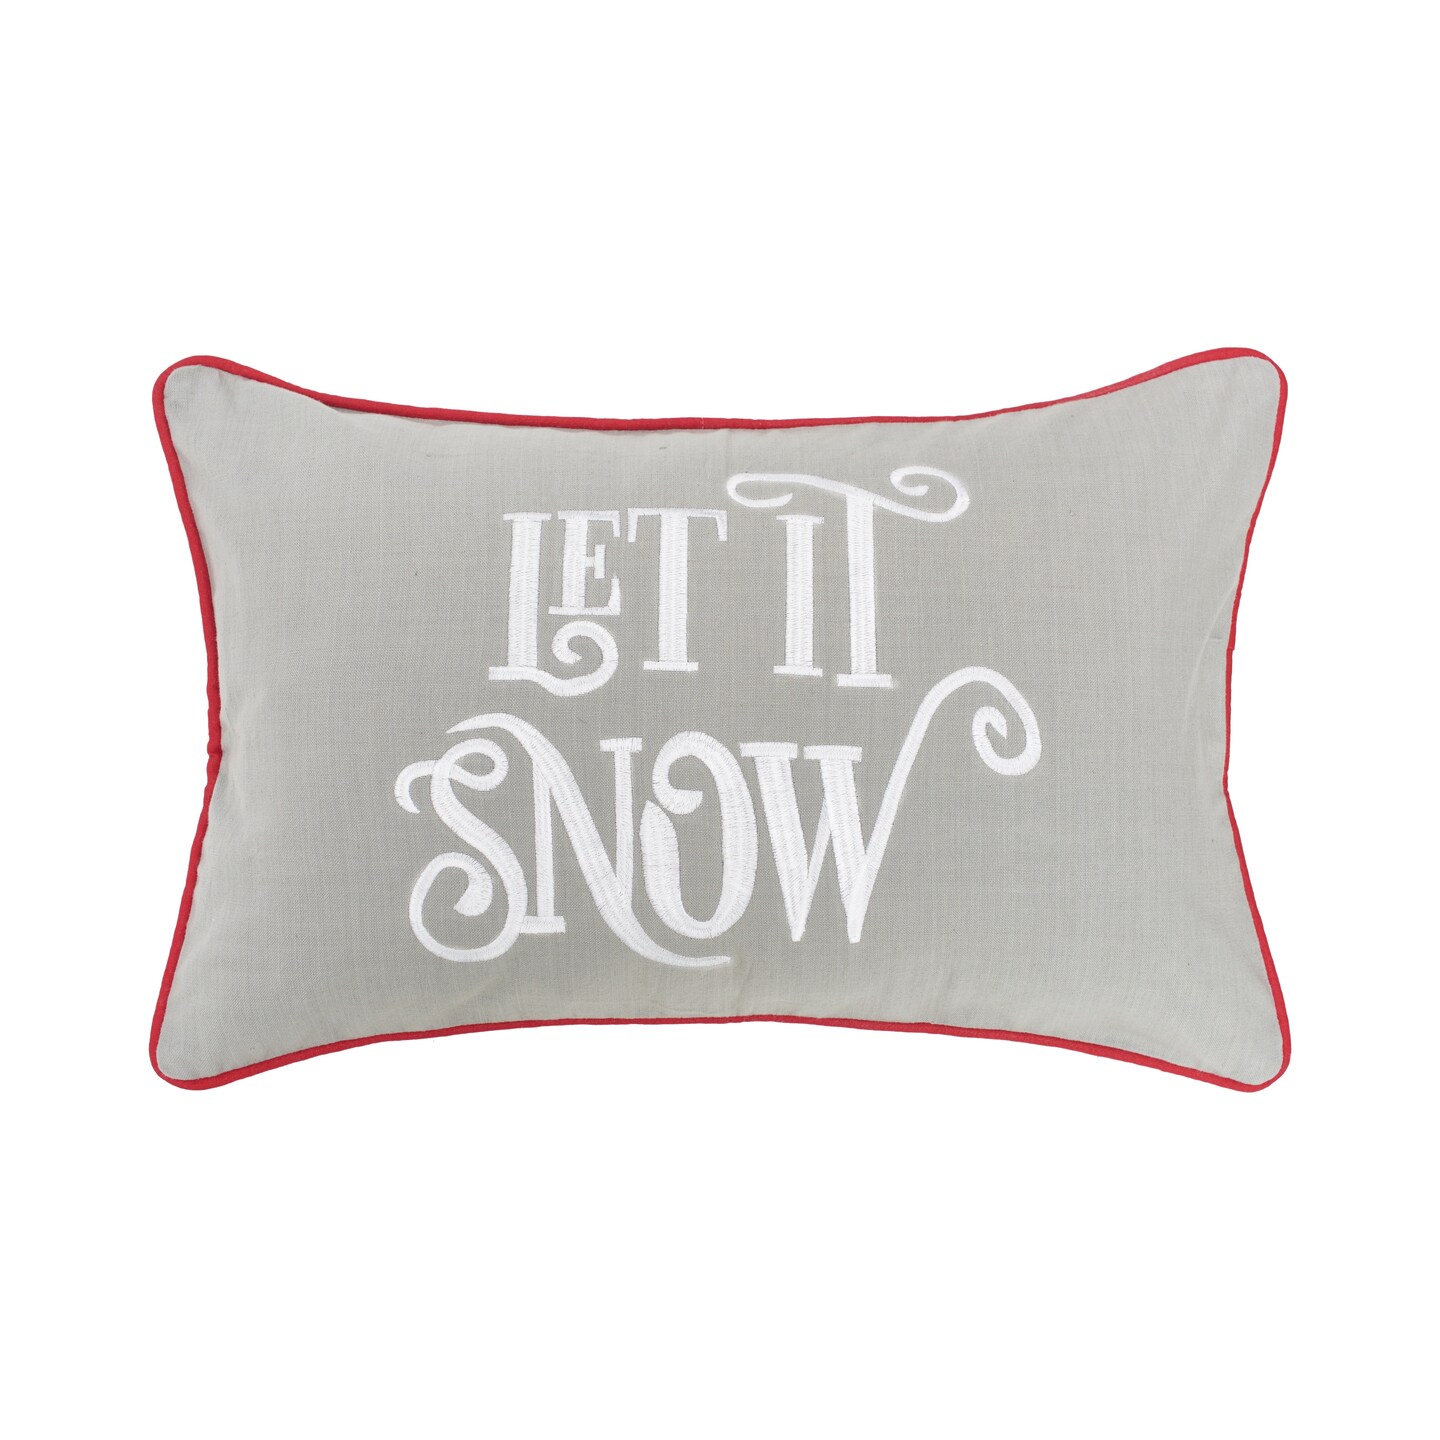 Let It Snow Printed Throw Pillow